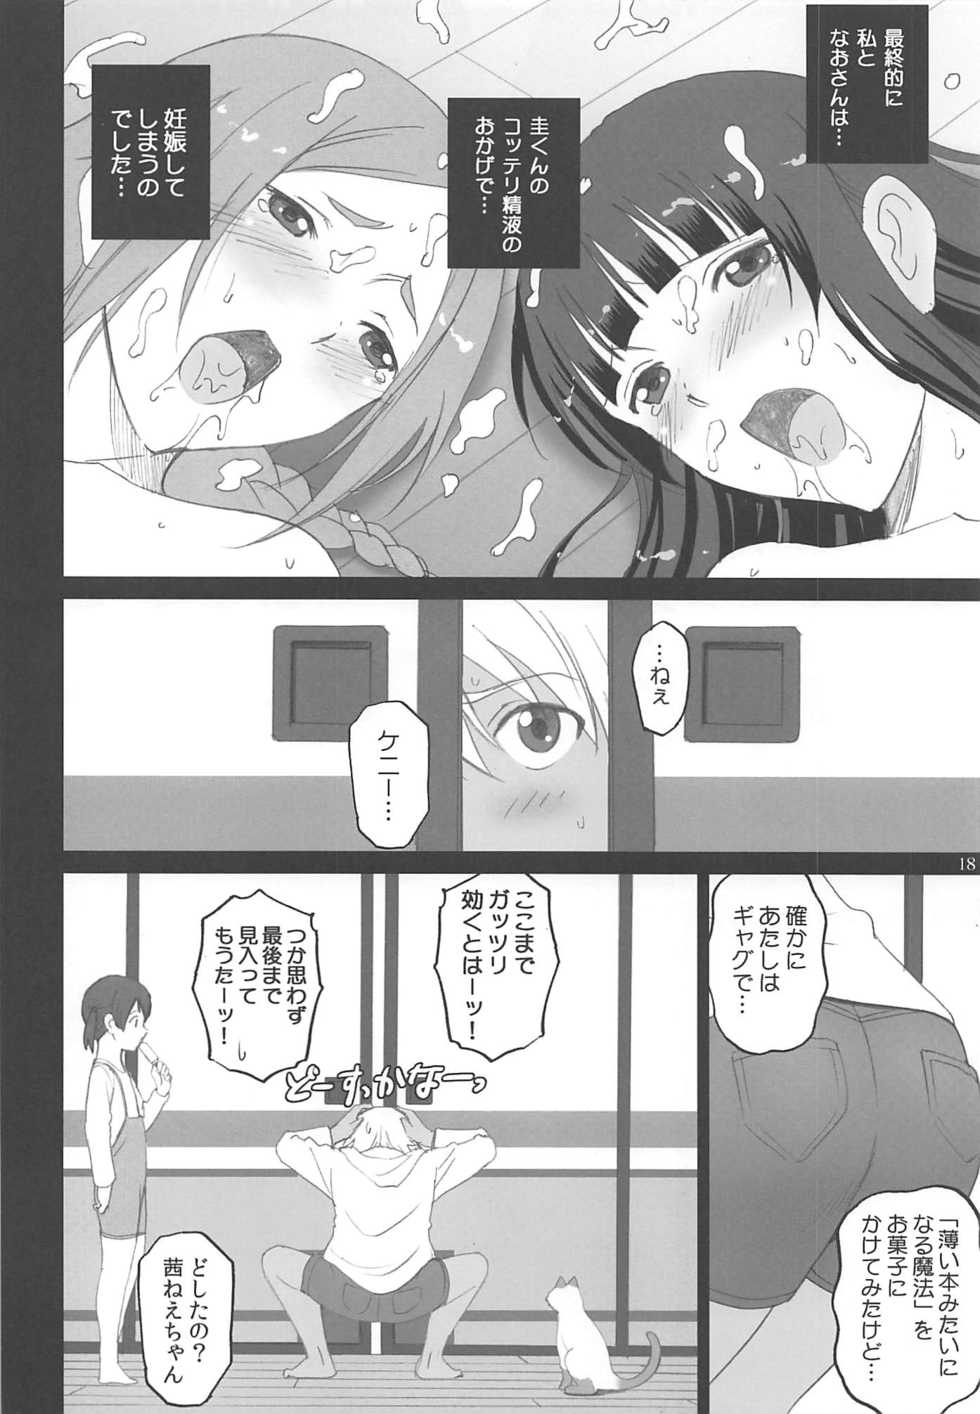 [ACTIVA (SMAC)] Fellaing Witch (Flying Witch) [2016-08-28] - Page 17